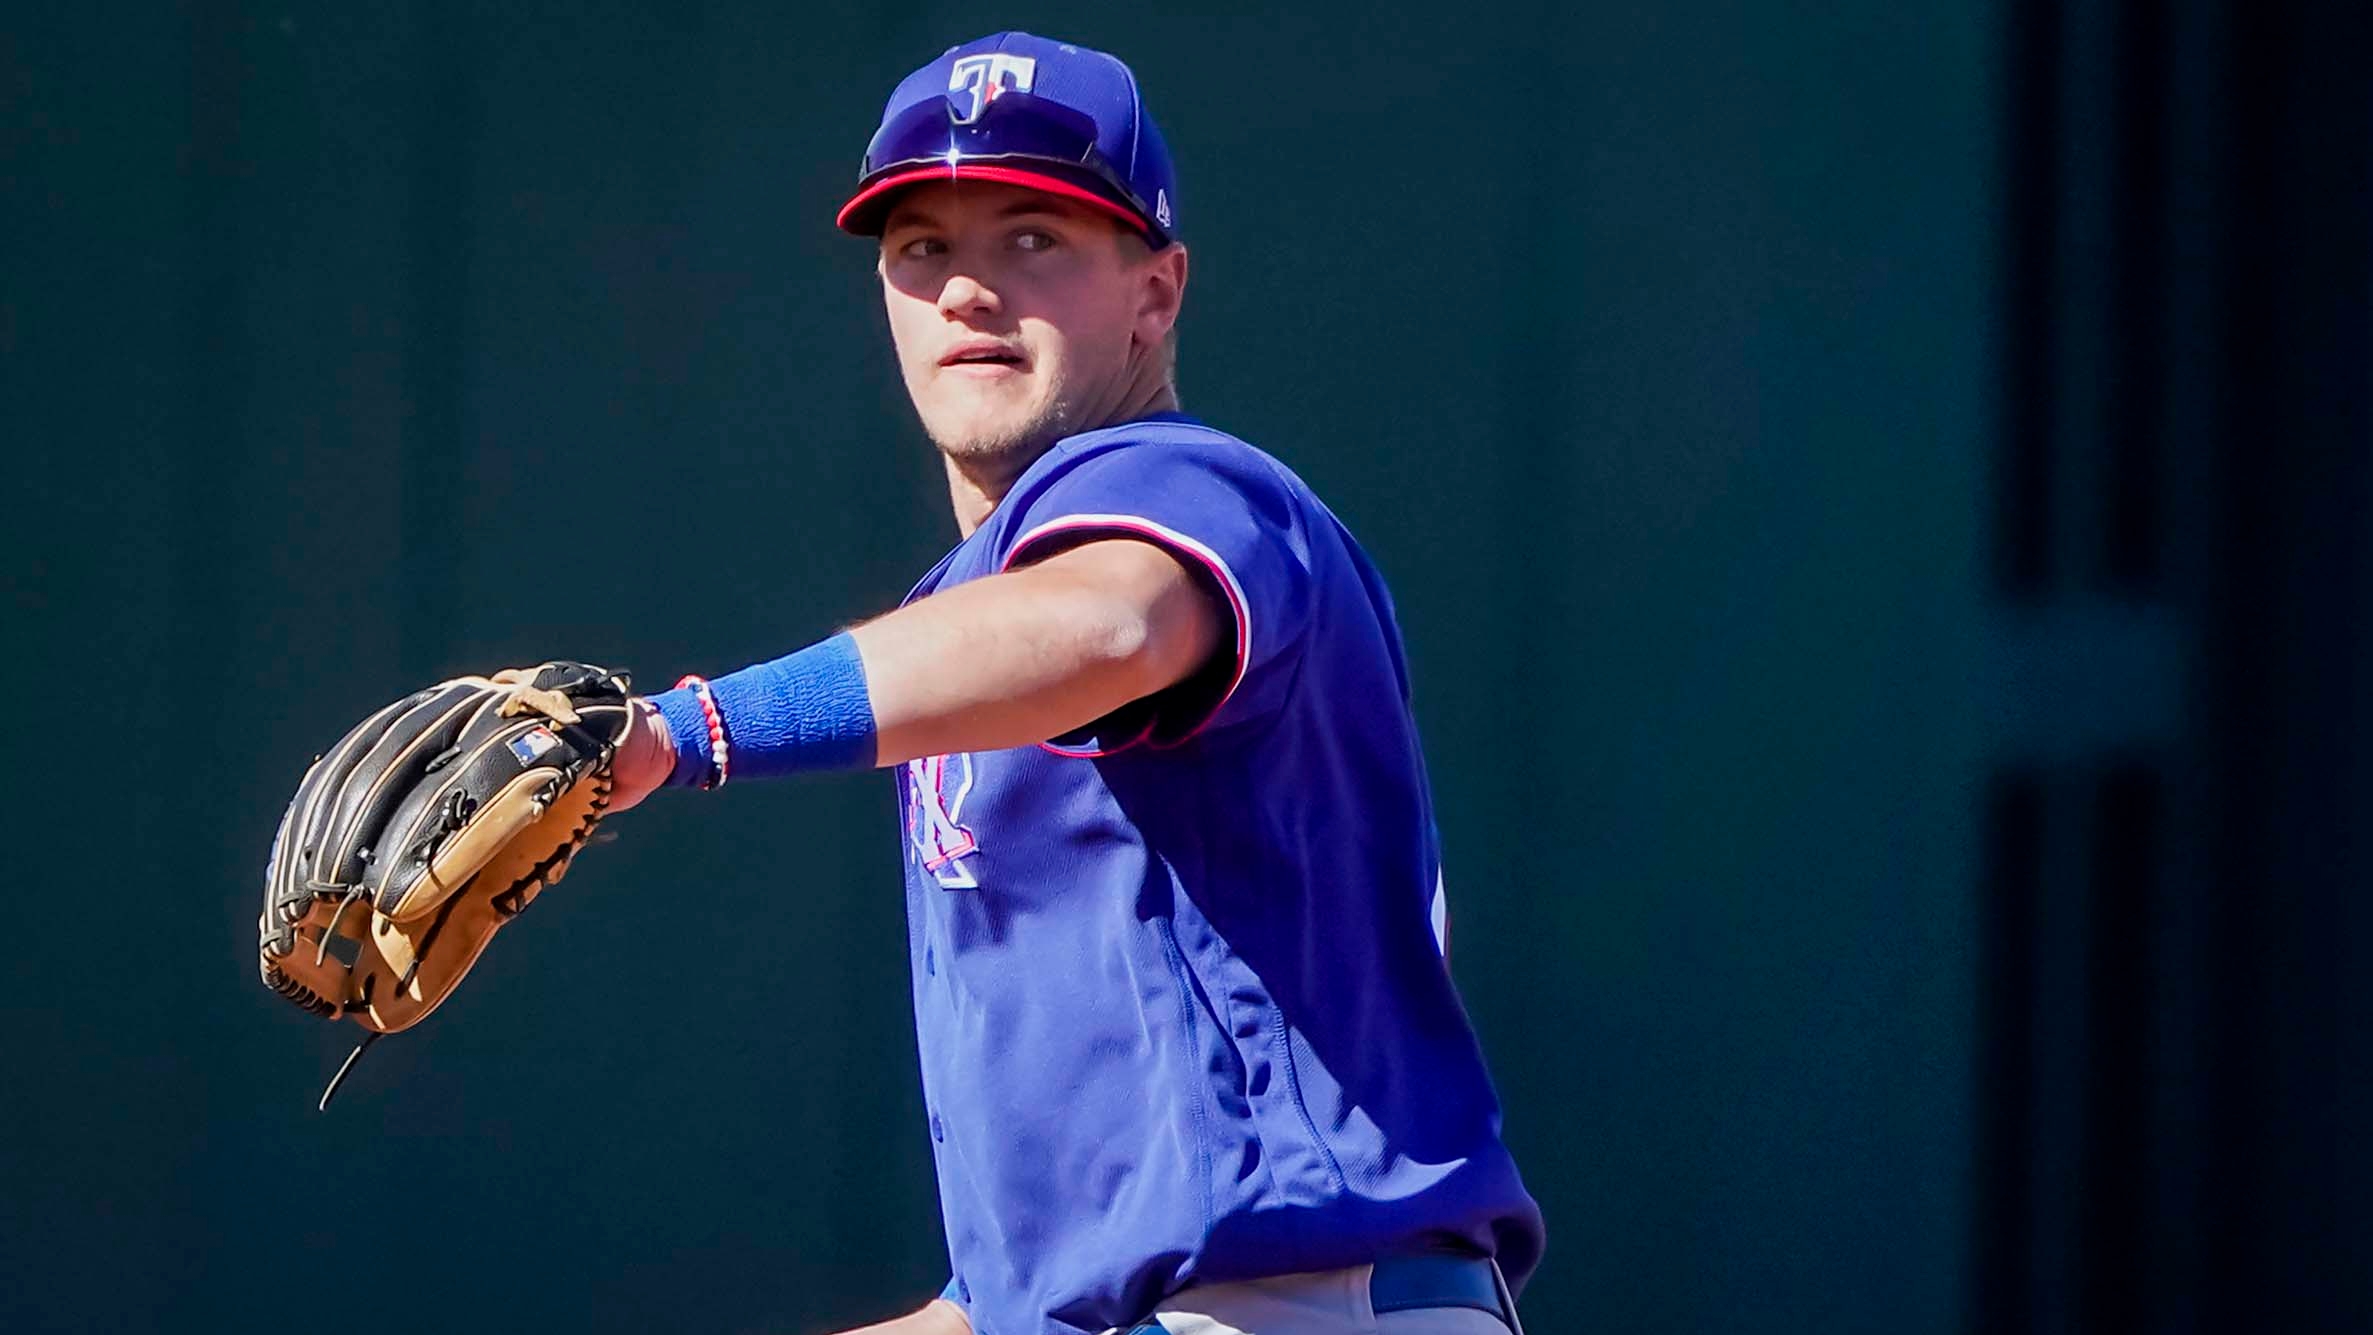 WATCH: Rookie Josh Jung Crushes Two Home Runs in Texas Rangers' 5-0 Win -  Fastball